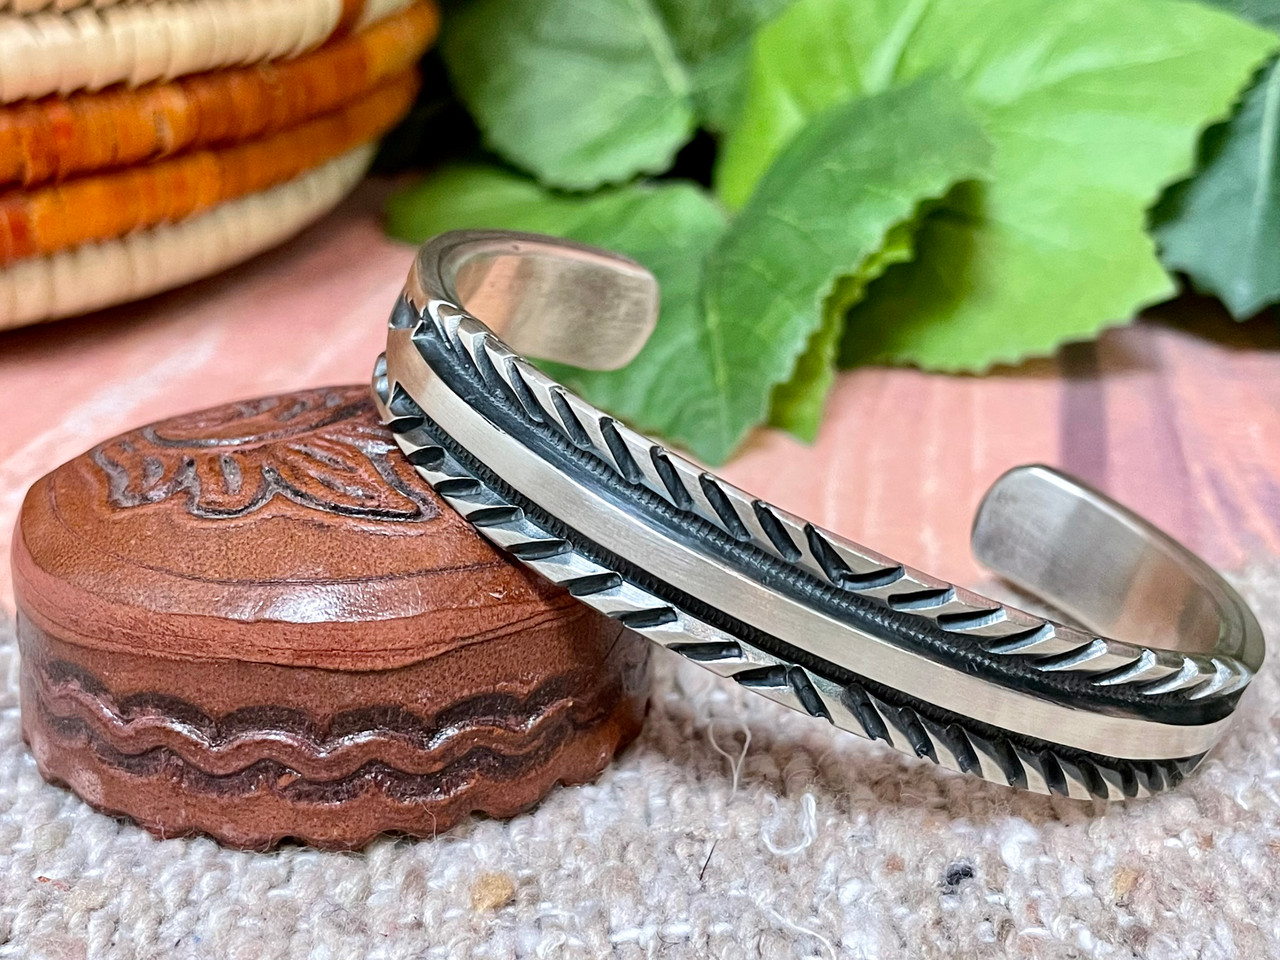 Authentic Navajo Sterling Silver Cuff Bracelet